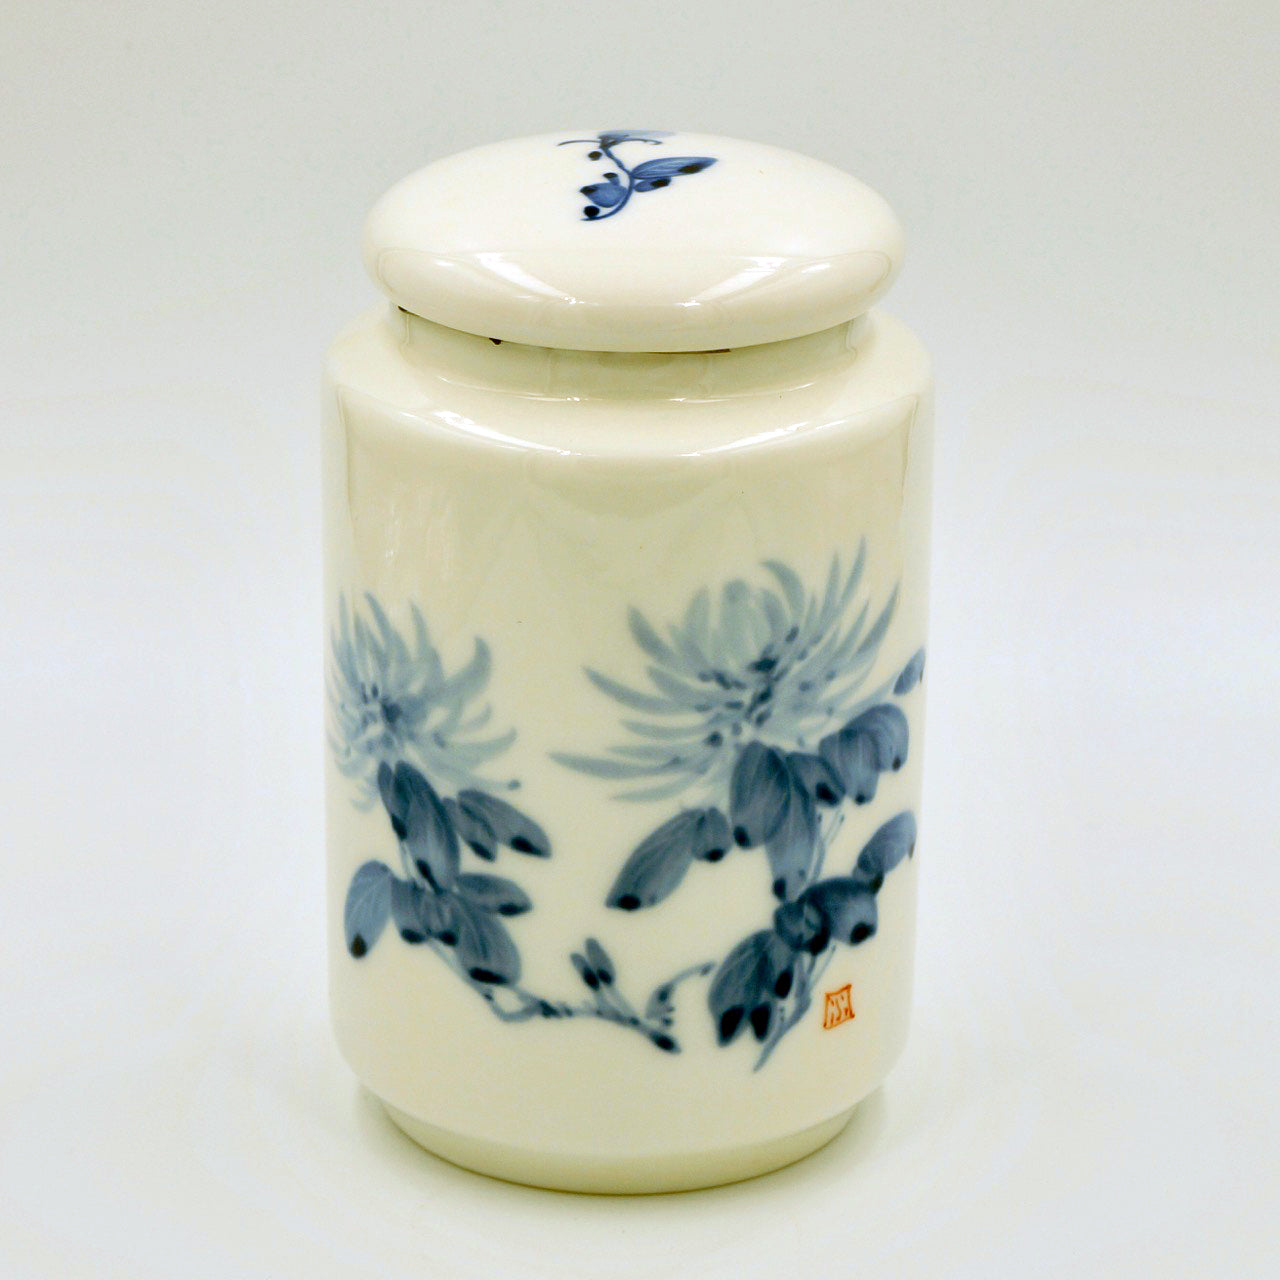 Chrysanthemum Tea Canister front view